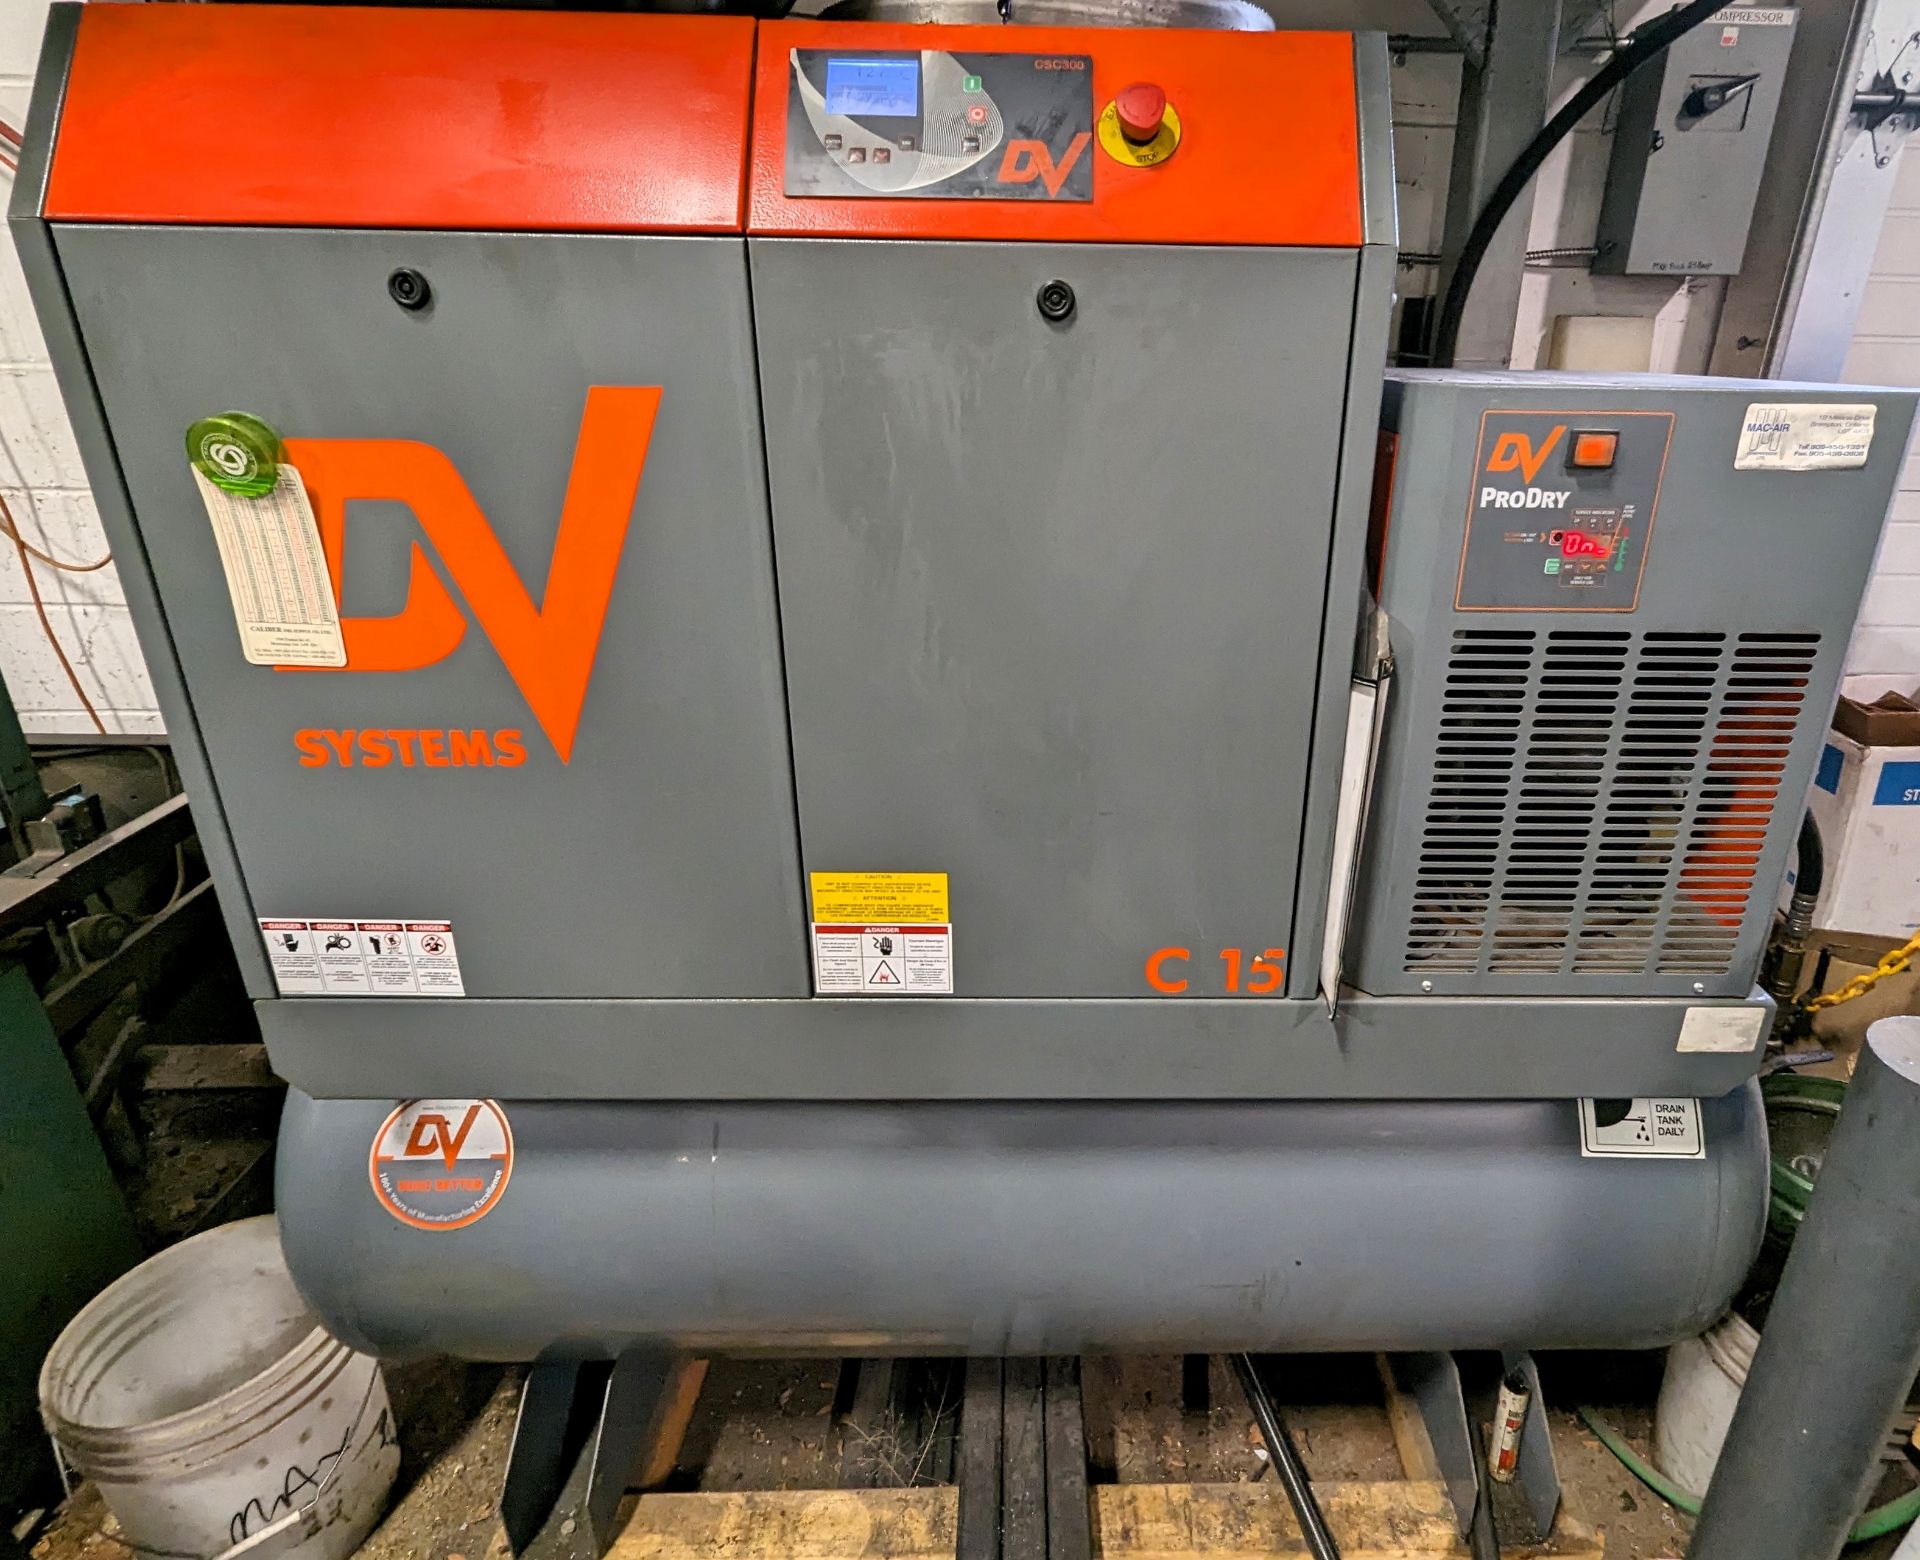 DV SYSTEMS C15TD AIR COMPRESSOR, 15HP, PRODUCT NUMBER S-002433, S/N 082733 W/ ASD60 AIR DRYER